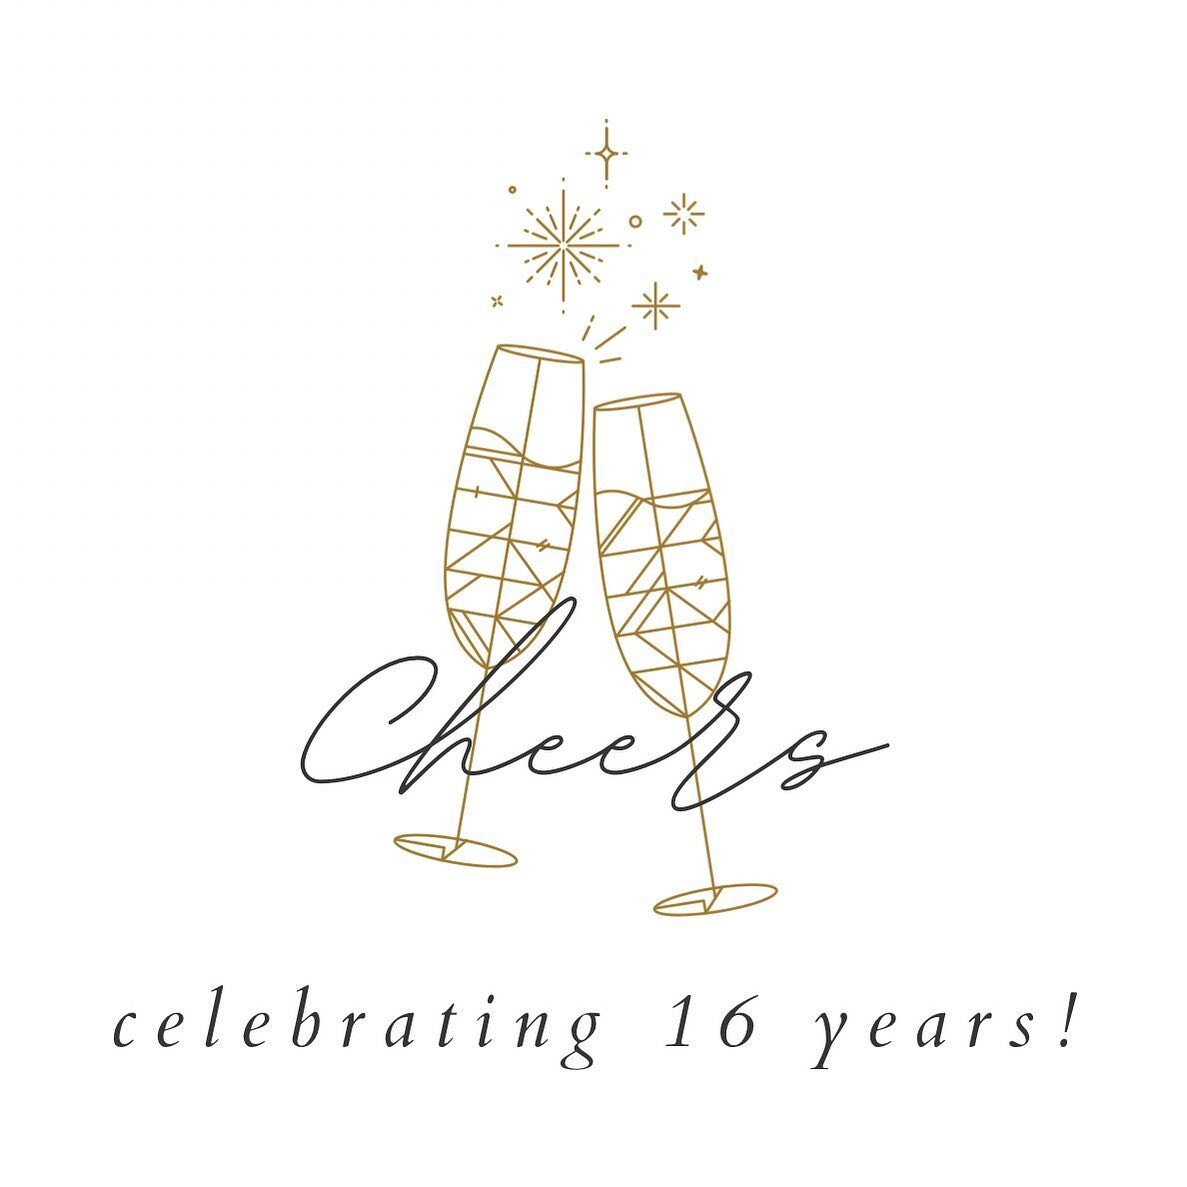 Pop the Champagne, we just
turned SIXTEEN! #sweetsixteen 🥂🍾 🥂

It's hard to believe that we opened our doors 1️⃣6️⃣ years ago today, January 1st, 2007.

On one hand it feels like I blinked and now we're here, and on the other, like an entire lifet